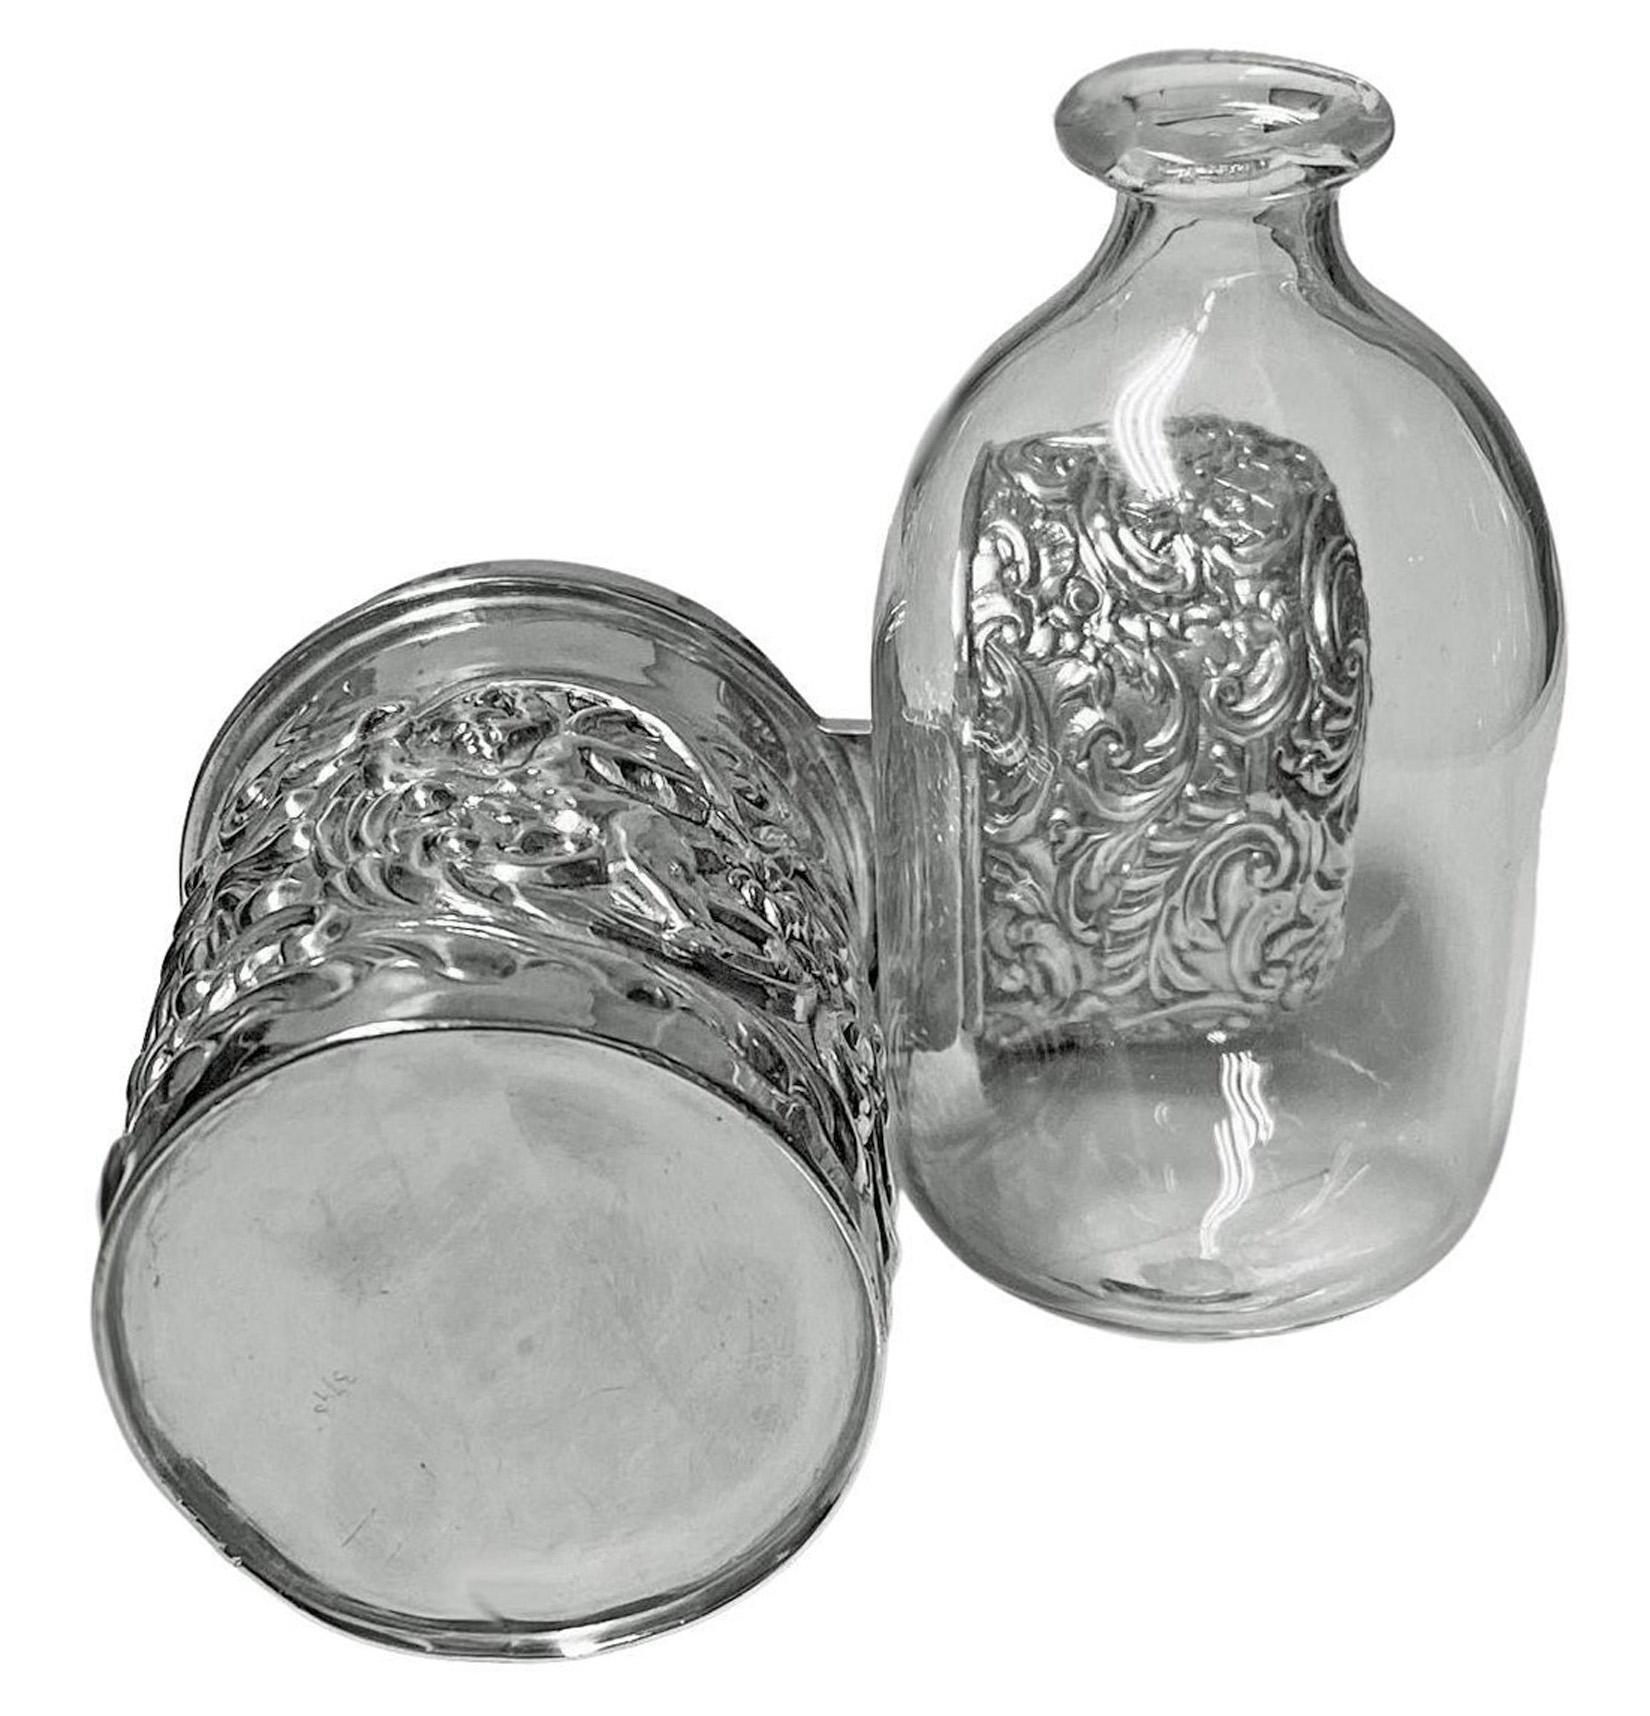 Antique Silver Scent Bottle with Removeable Glass Interior, London 1895 William 3